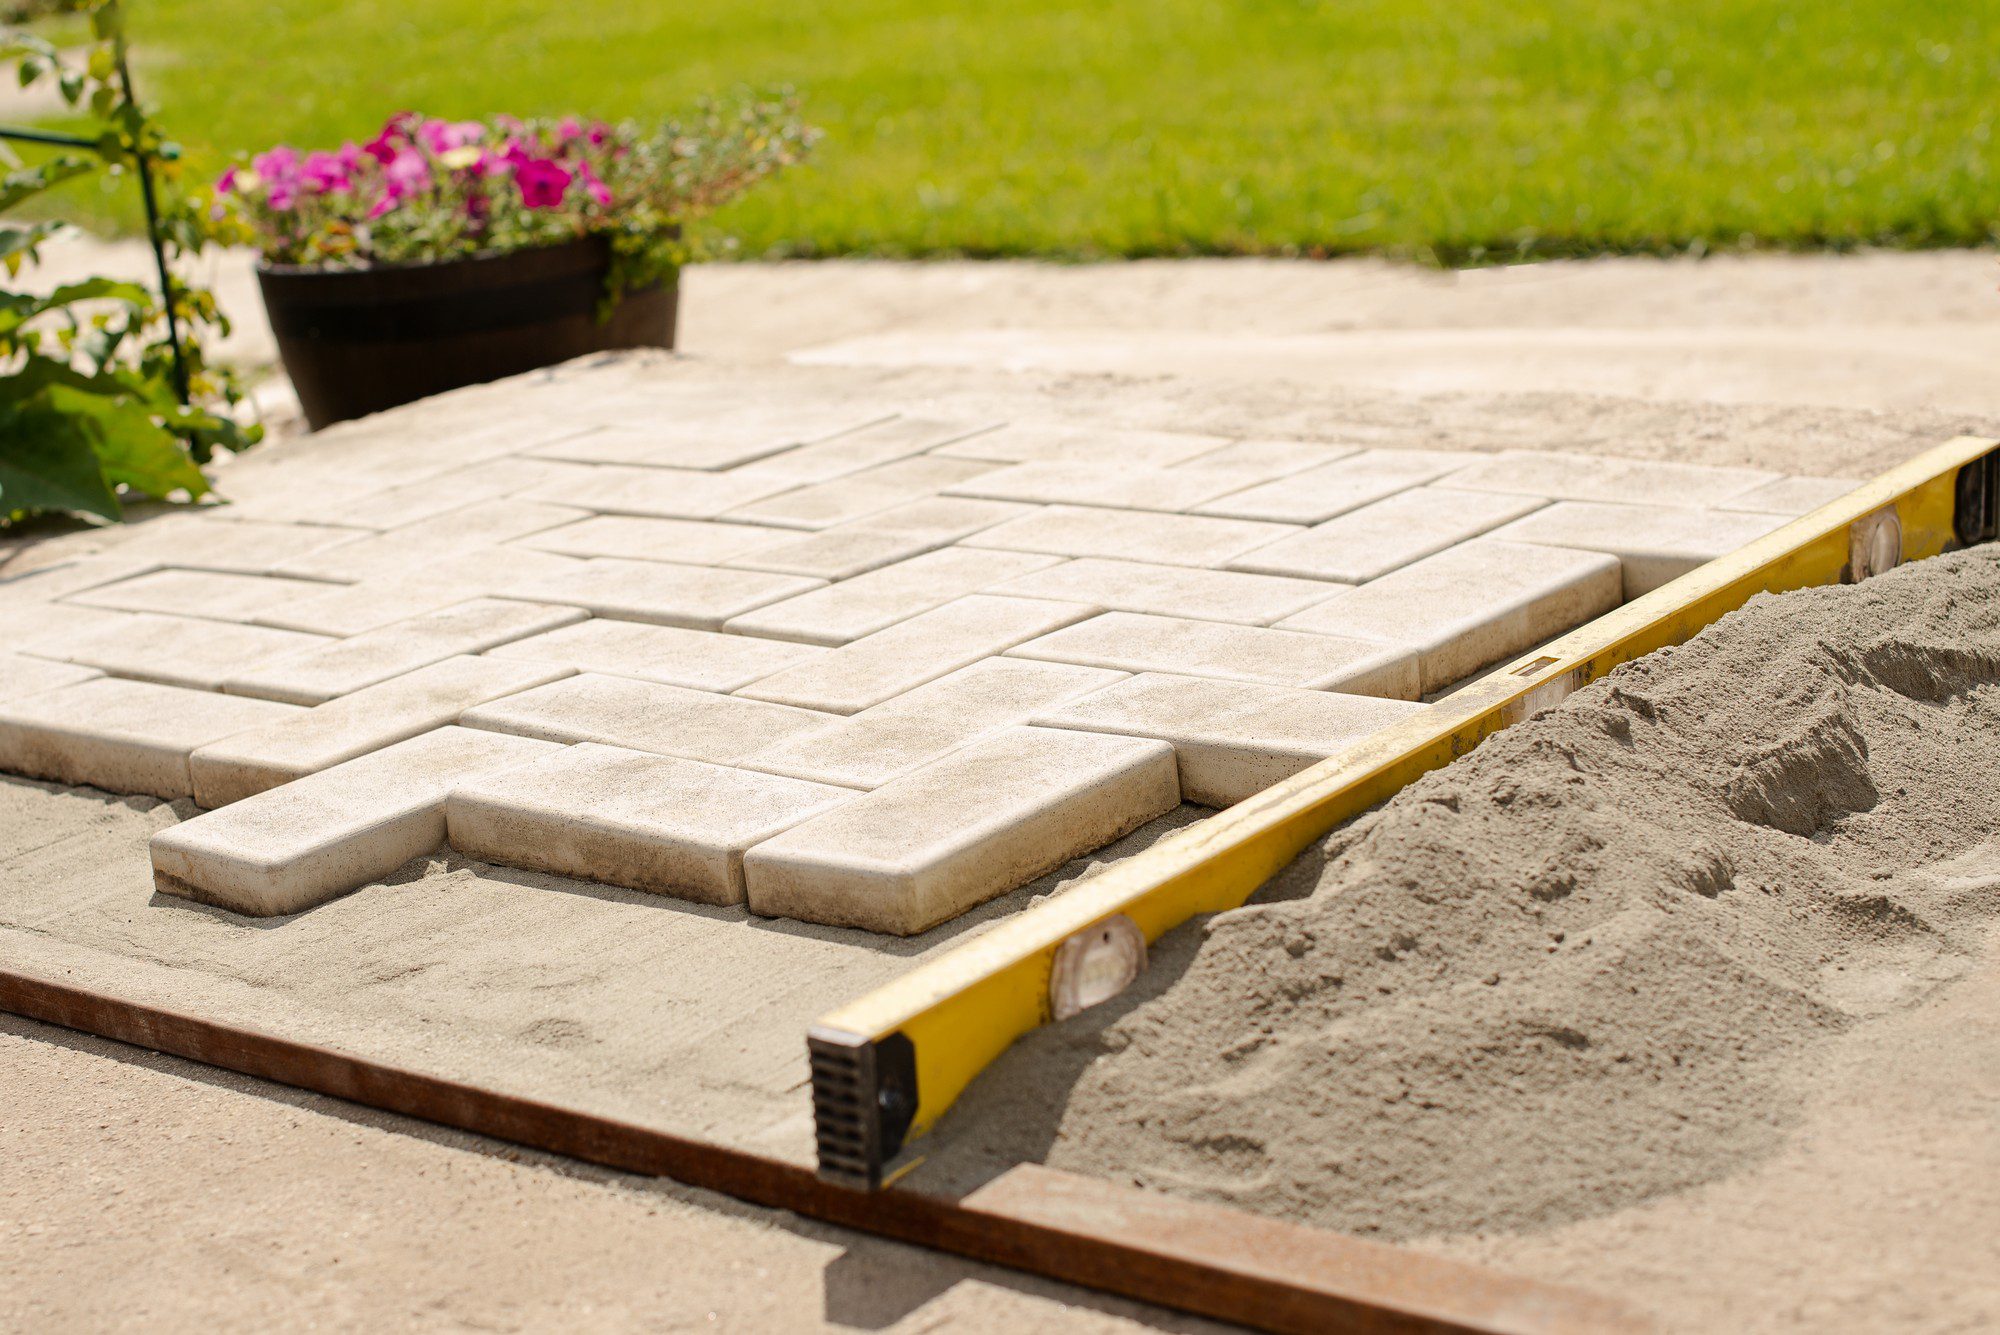 The image shows a paved area that appears to be in the process of construction. There are rectangular paving stones or bricks laid out in a herringbone pattern on a bed of sand. One of the paving stones is slightly raised above the rest, likely awaiting proper placement. A spirit level, which is a tool used to cheque surfaces for levelness, lies on top of the pavers, indicating that the work is being checked for precision. Some sand is piled to the side, indicating ongoing work, while the boundary of the paved area is defined by metal or wooden edging. The background shows a lush green lawn and a dark-coloured flowerpot with pink flowers, suggesting a residential garden setting. The sun is shining, and the overall atmosphere looks like a pleasant day for outdoor work.